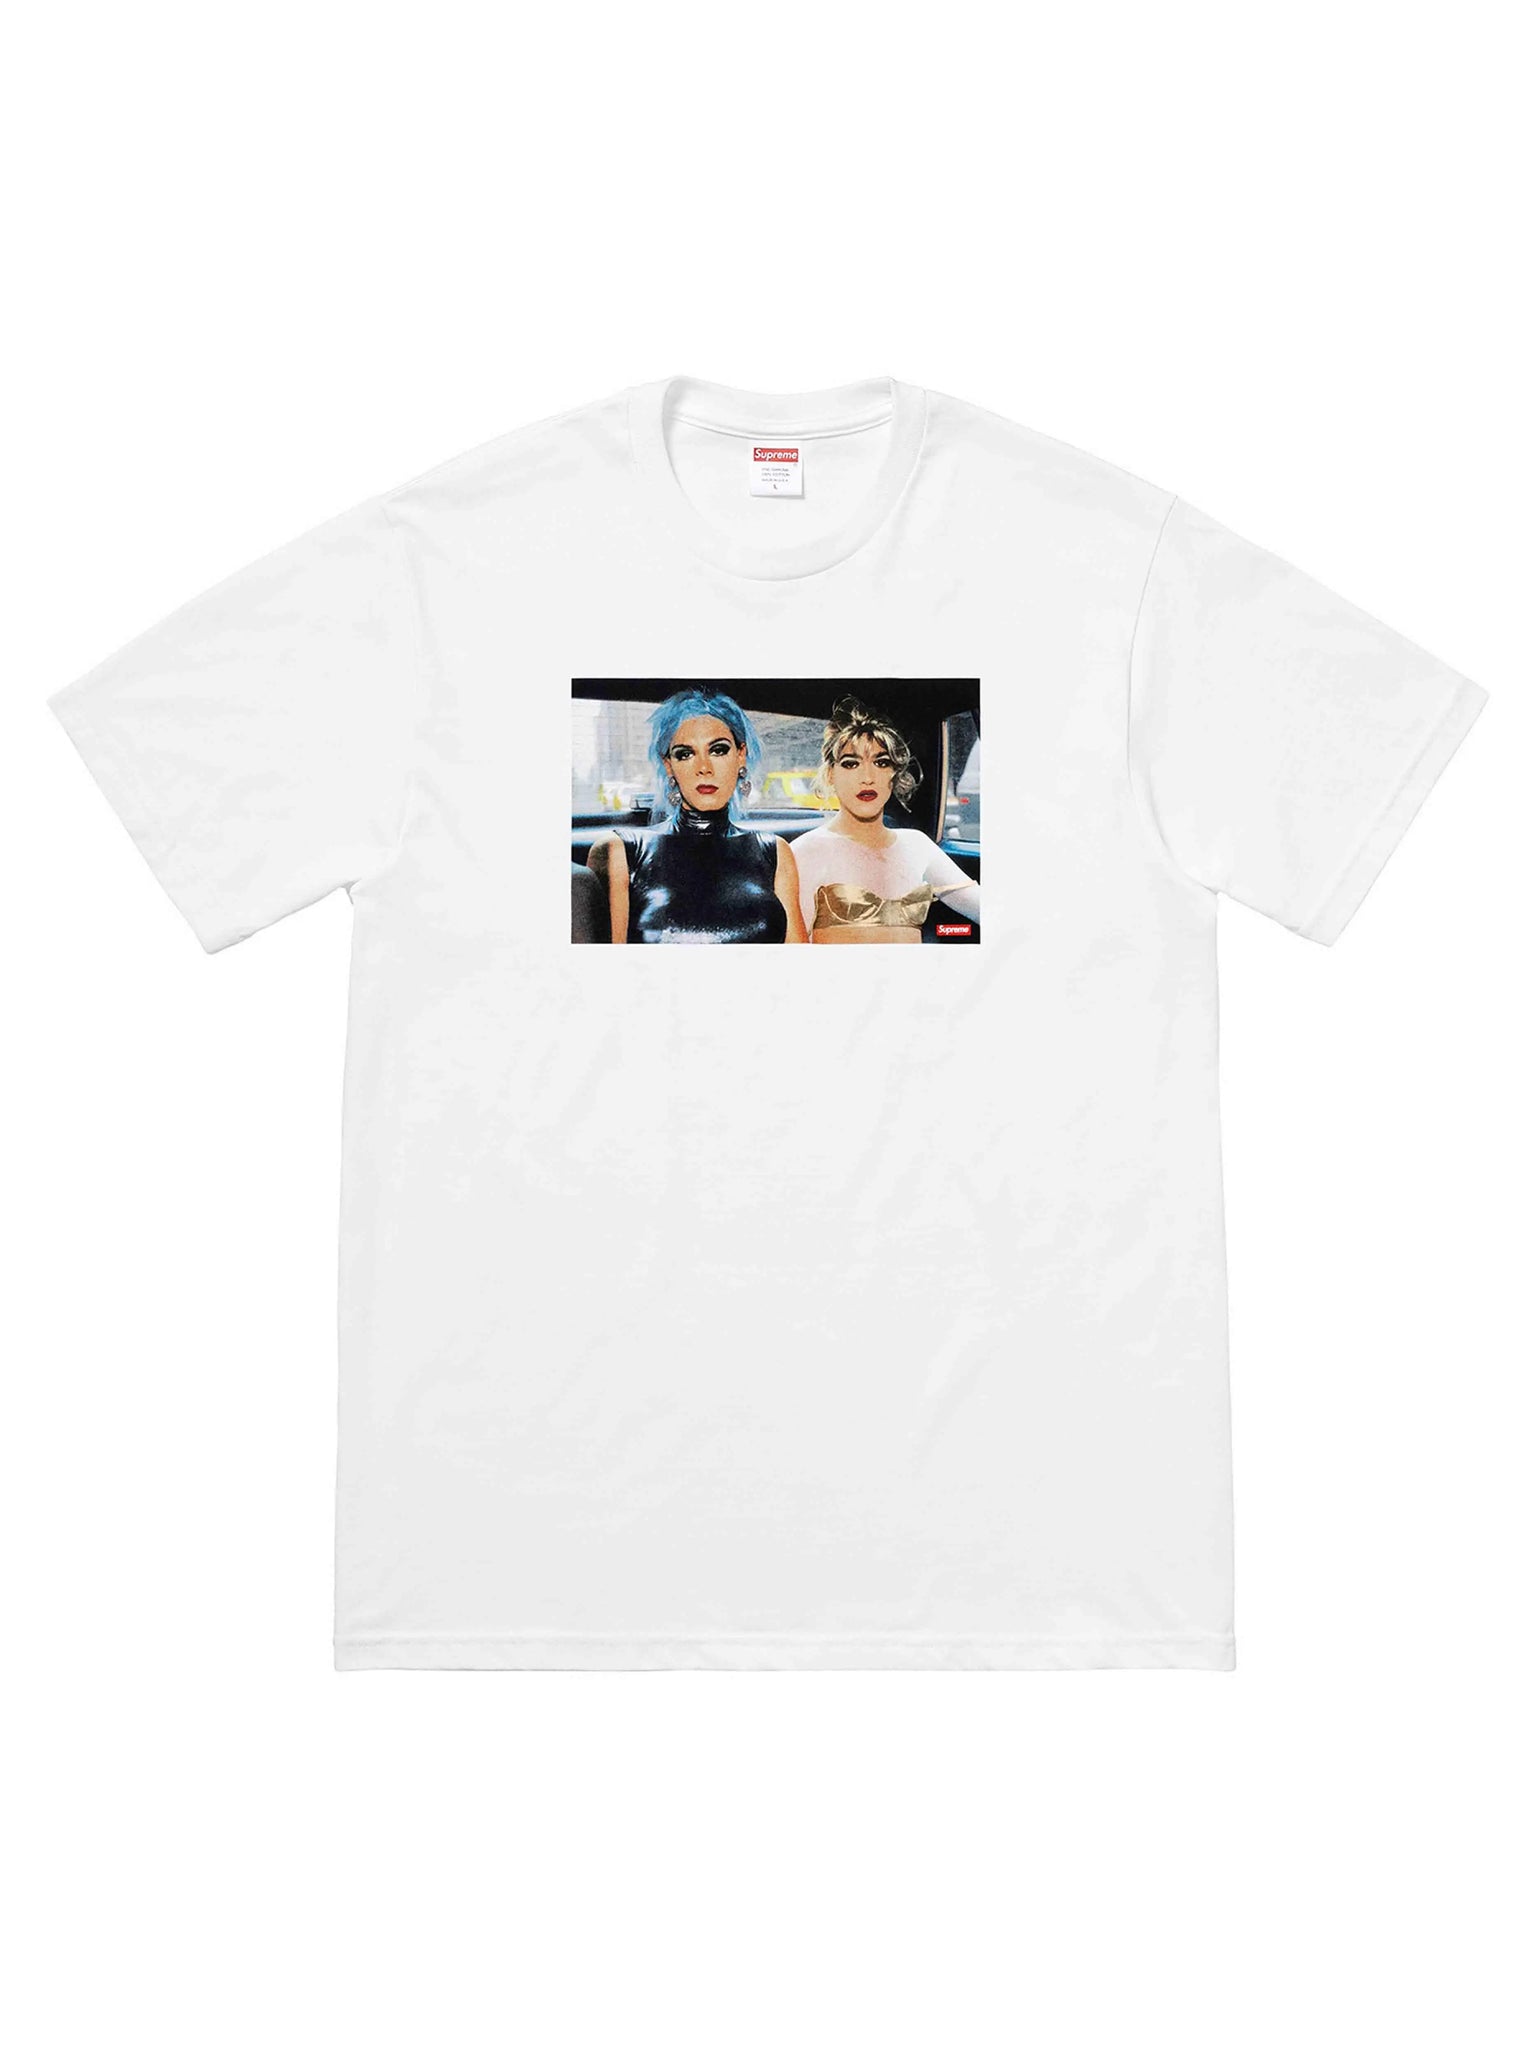 Supreme Nan Goldin Misty And Jimmy Paulette Tee White [SS18] Prior